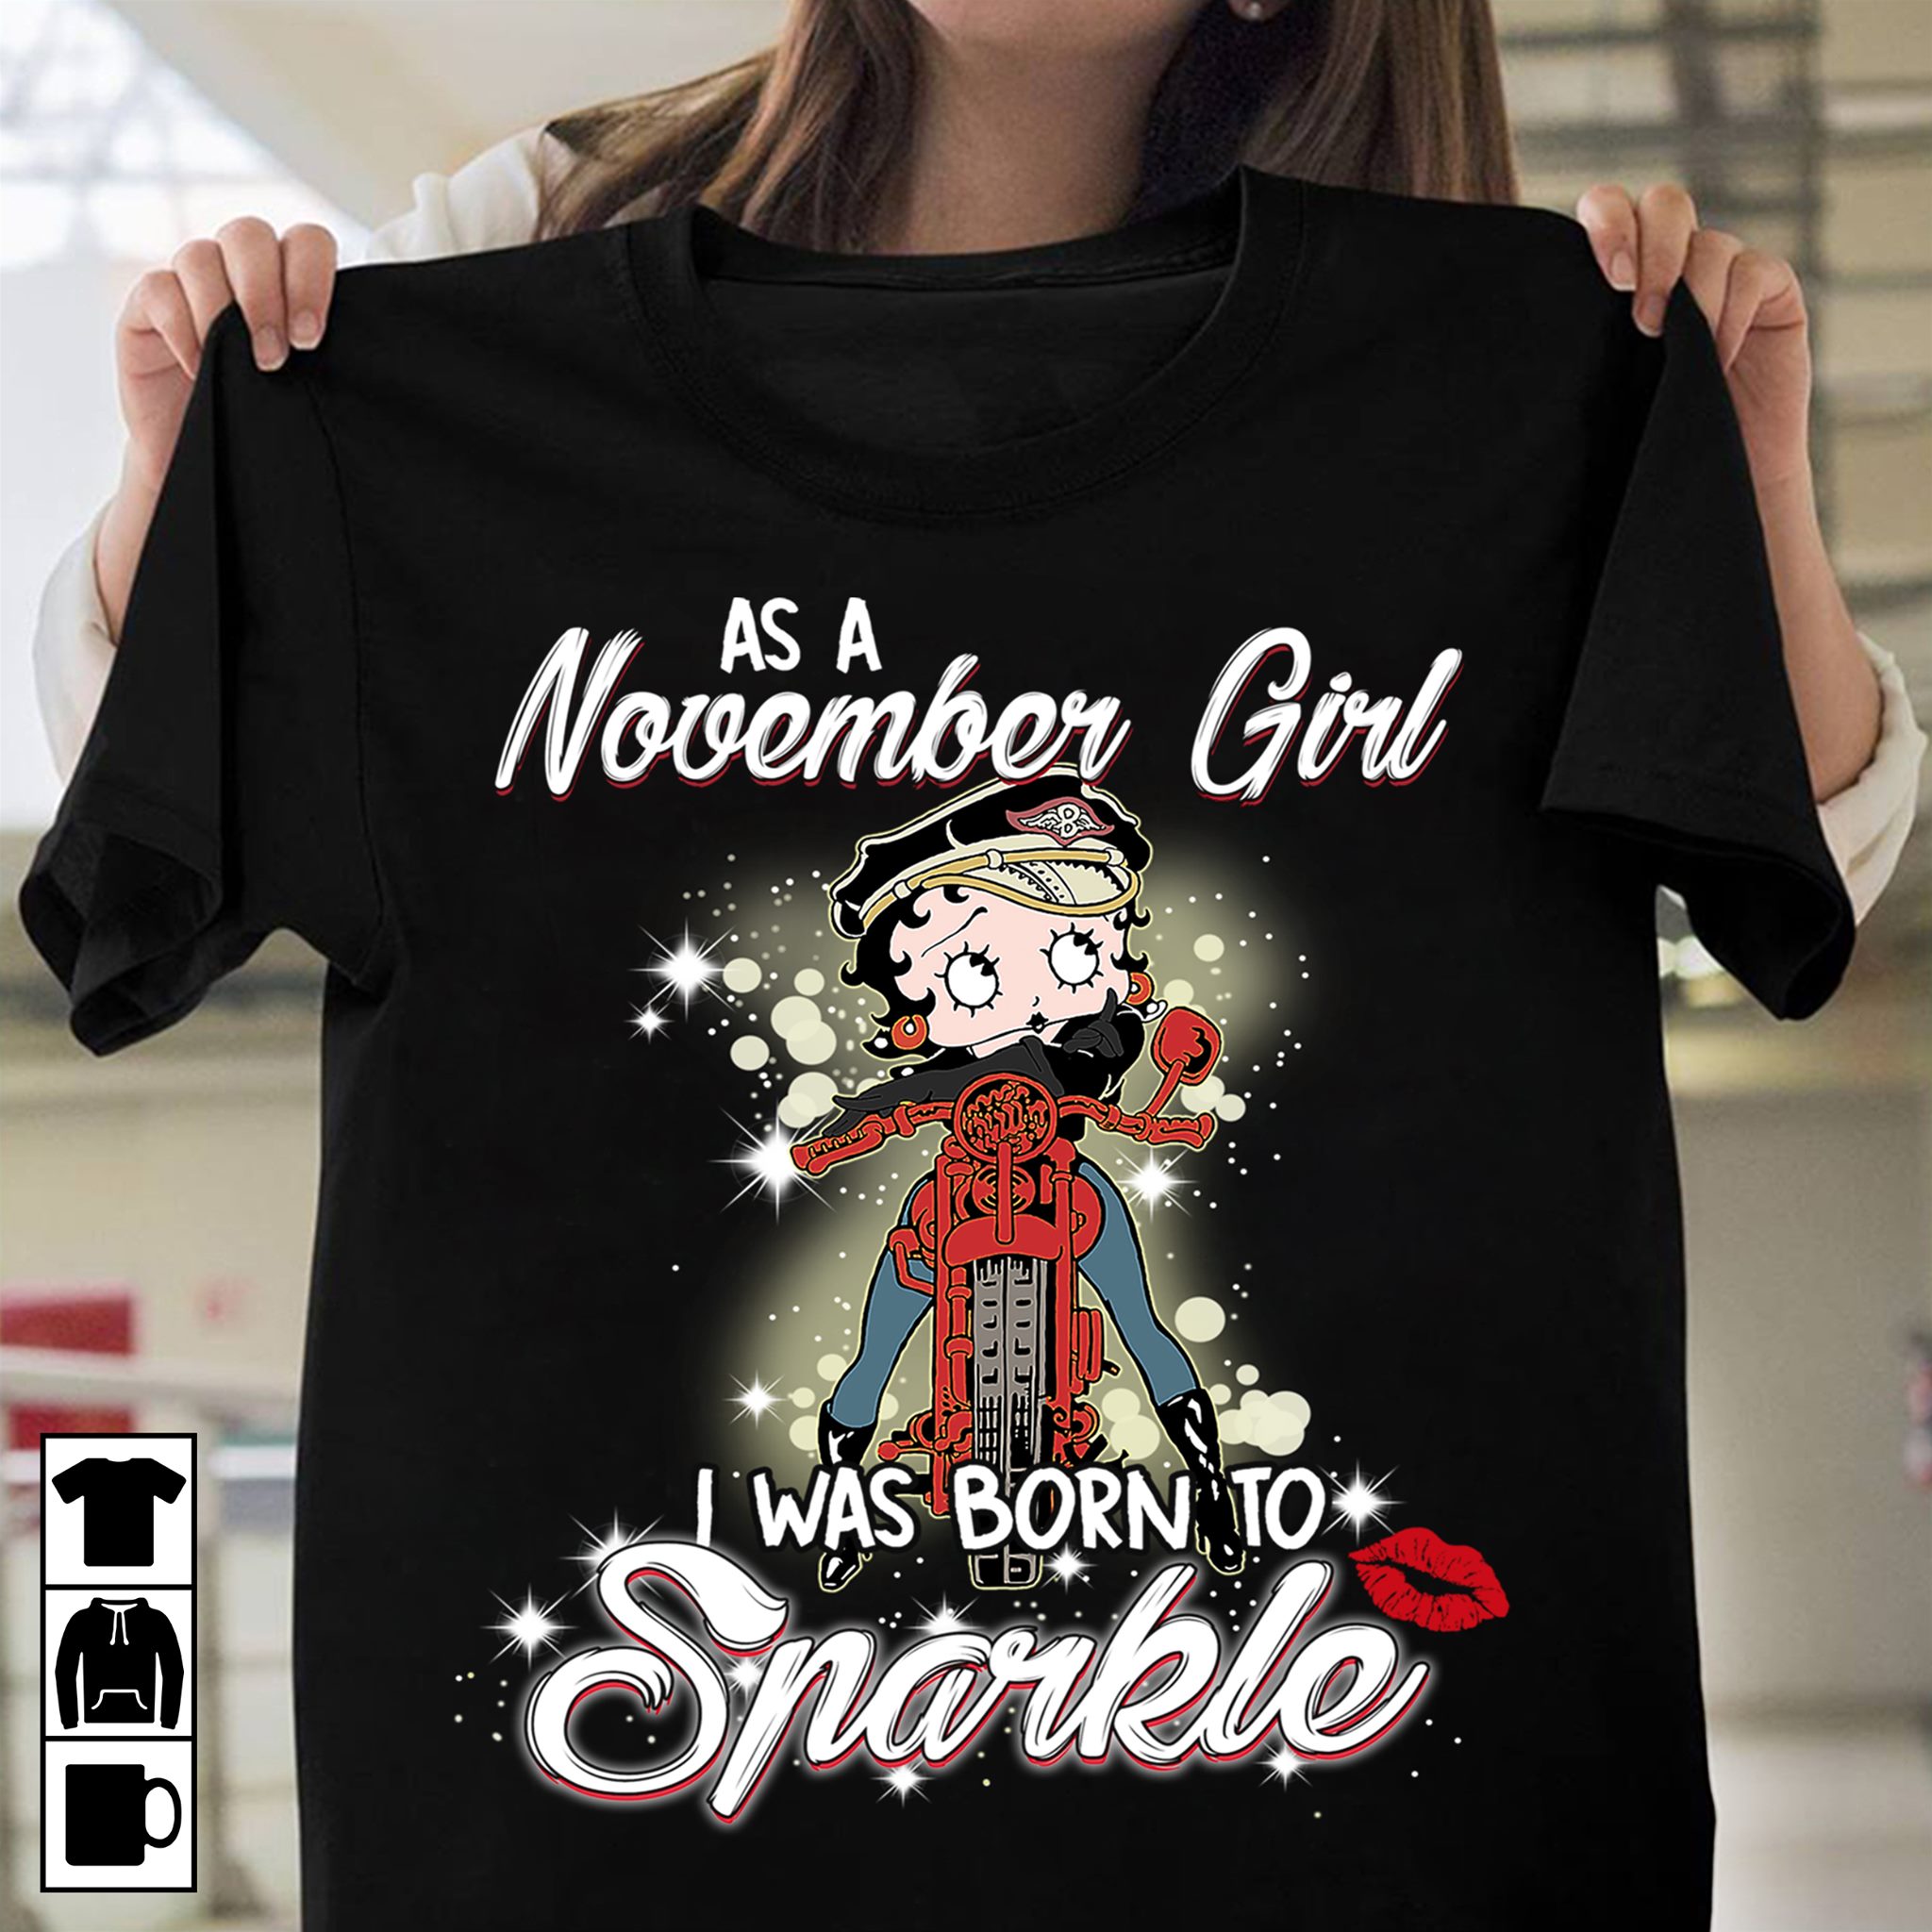 As a november girl I was born to sparkle - Girl and motorcycle